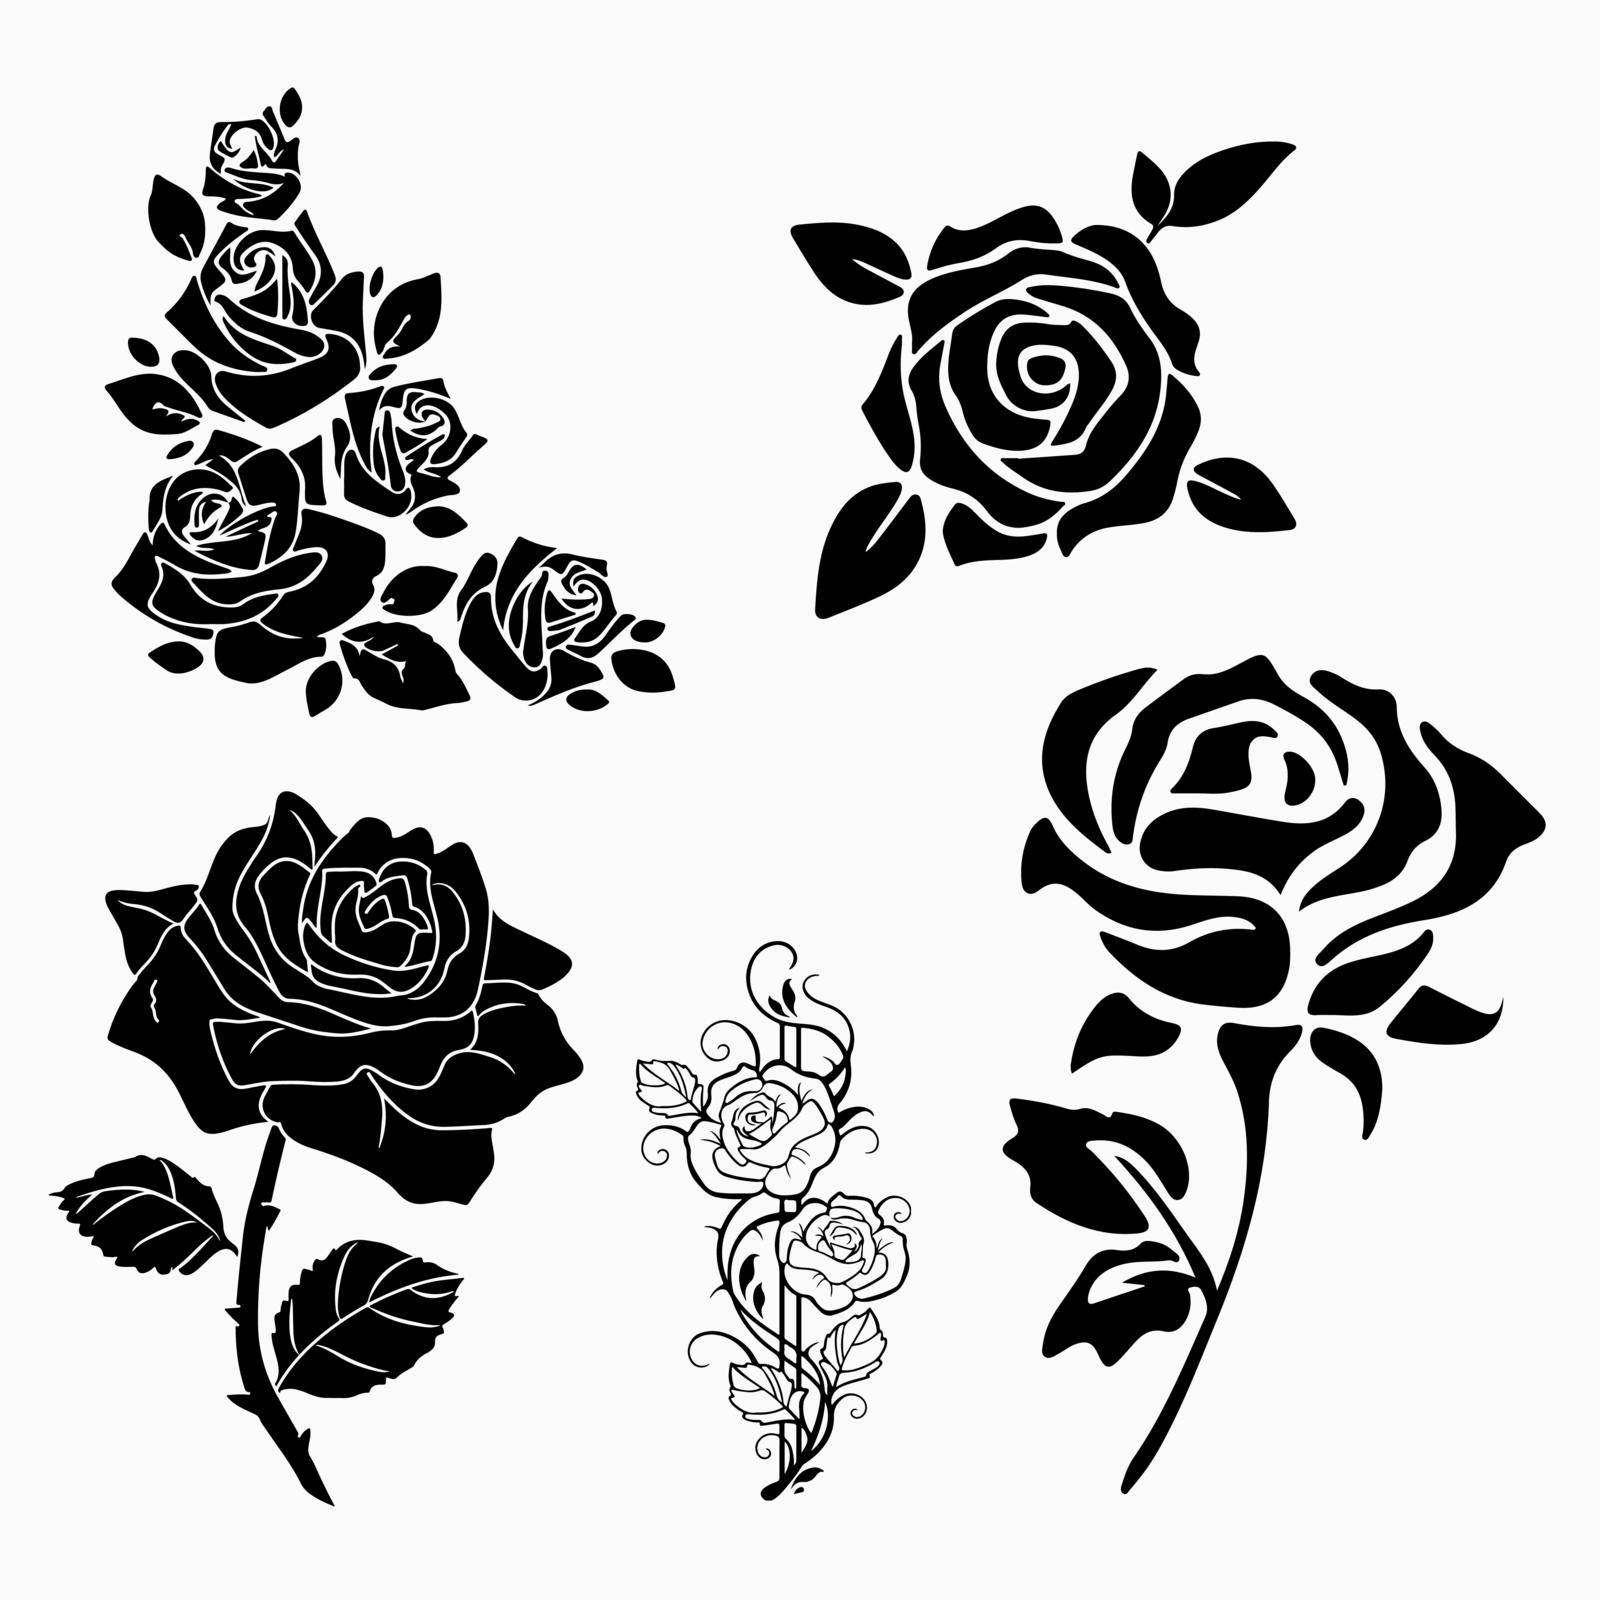 Solid icons for rose flower and shadow,vector illustrations by Frutlower